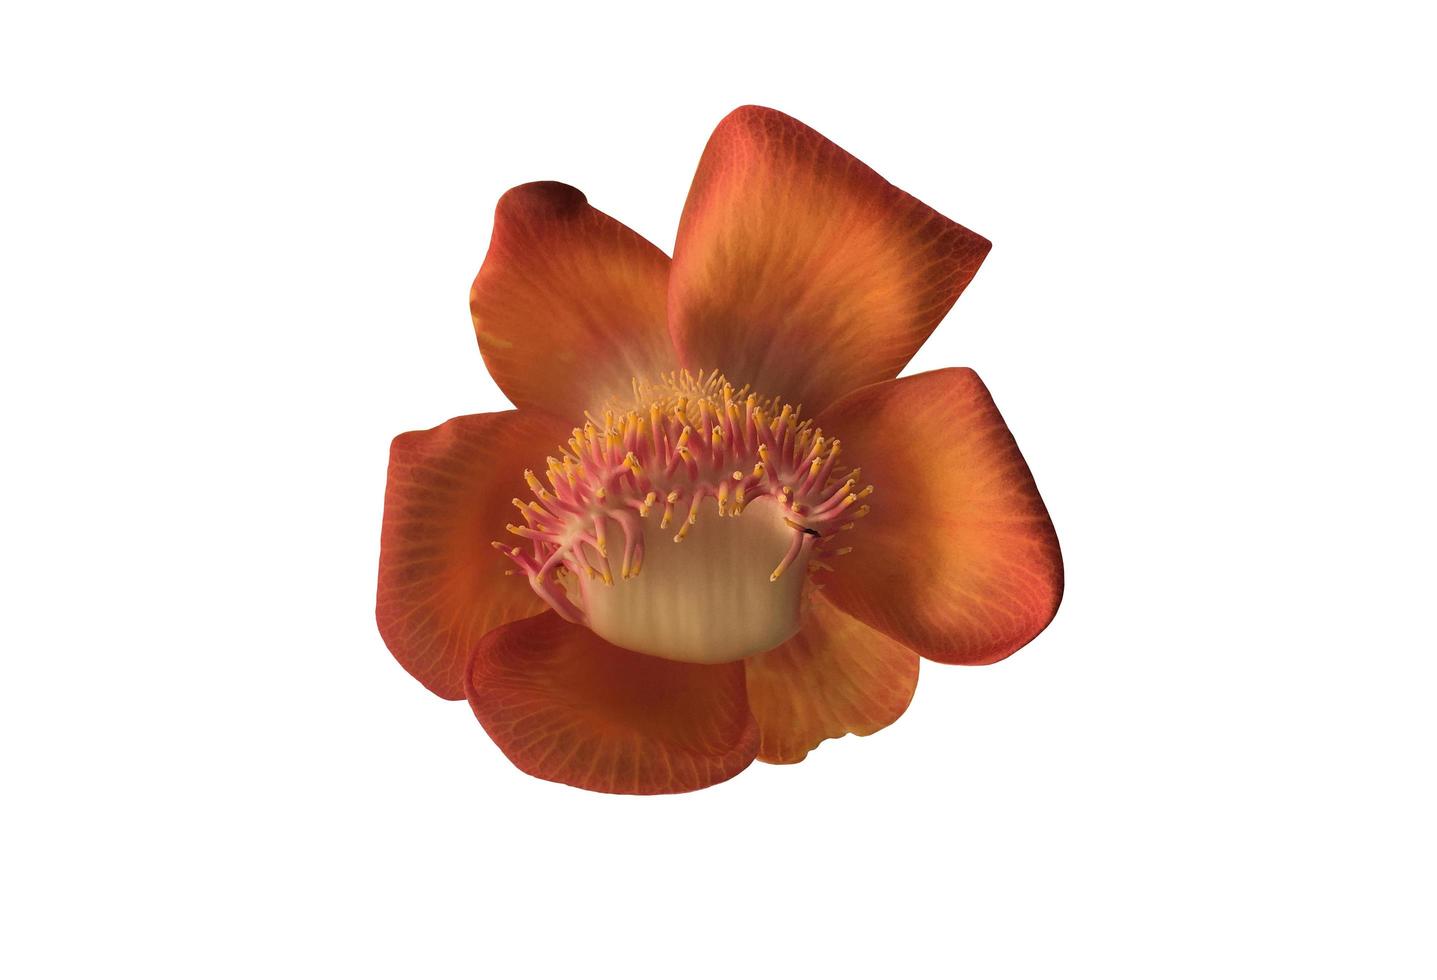 Isolated cannon ball flower with clipping paths. photo